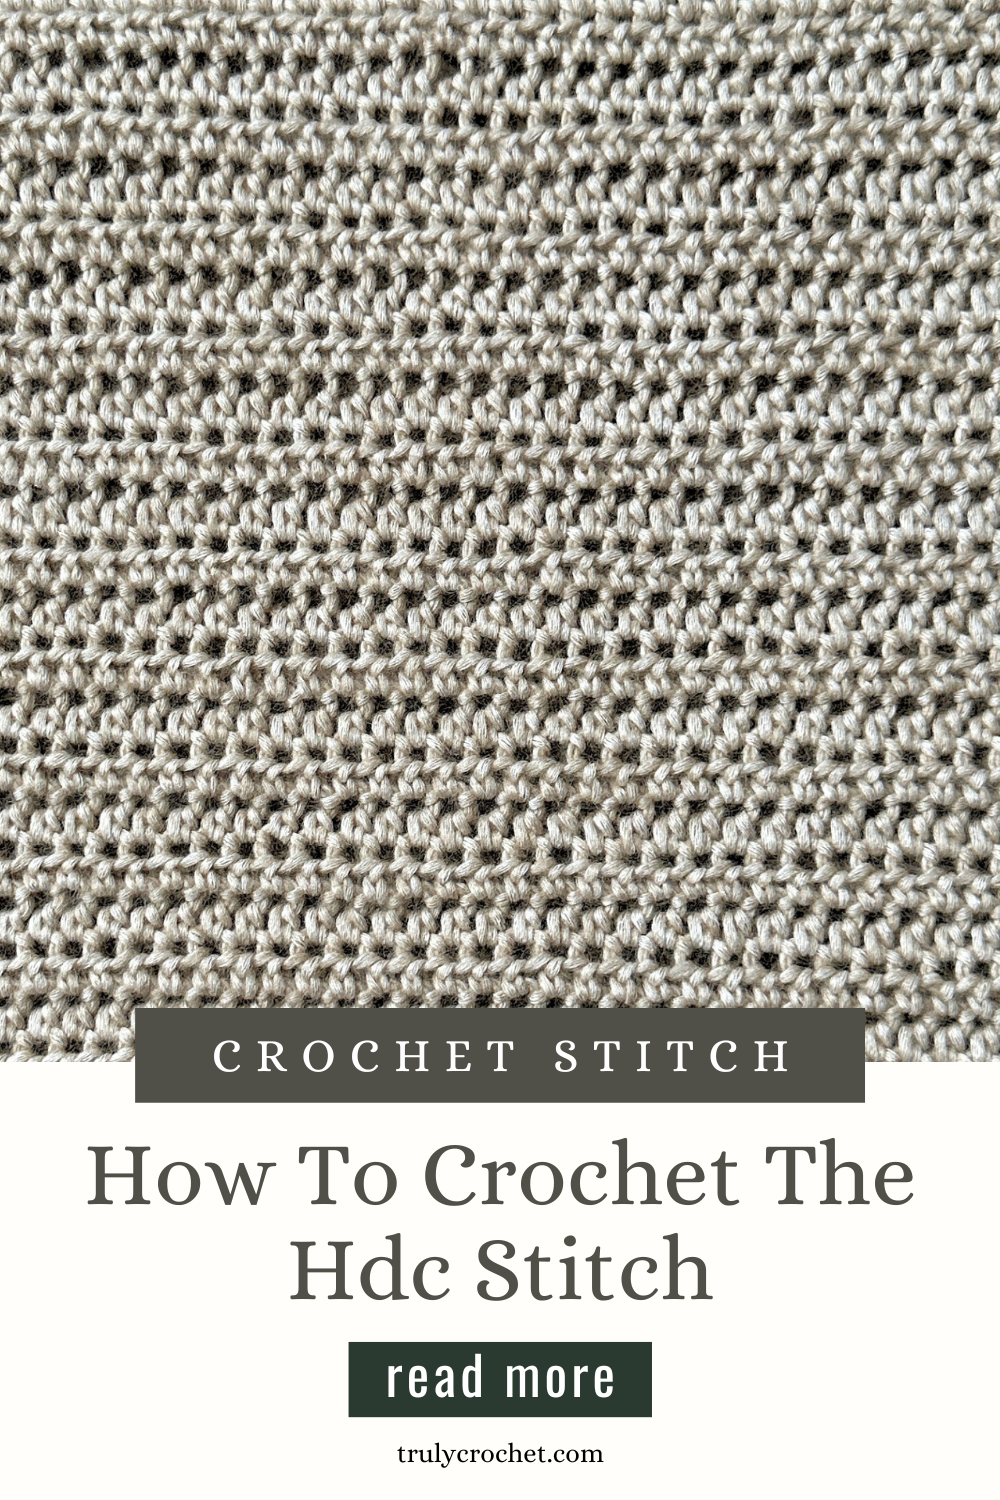 How To Crochet The Hdc Stitch